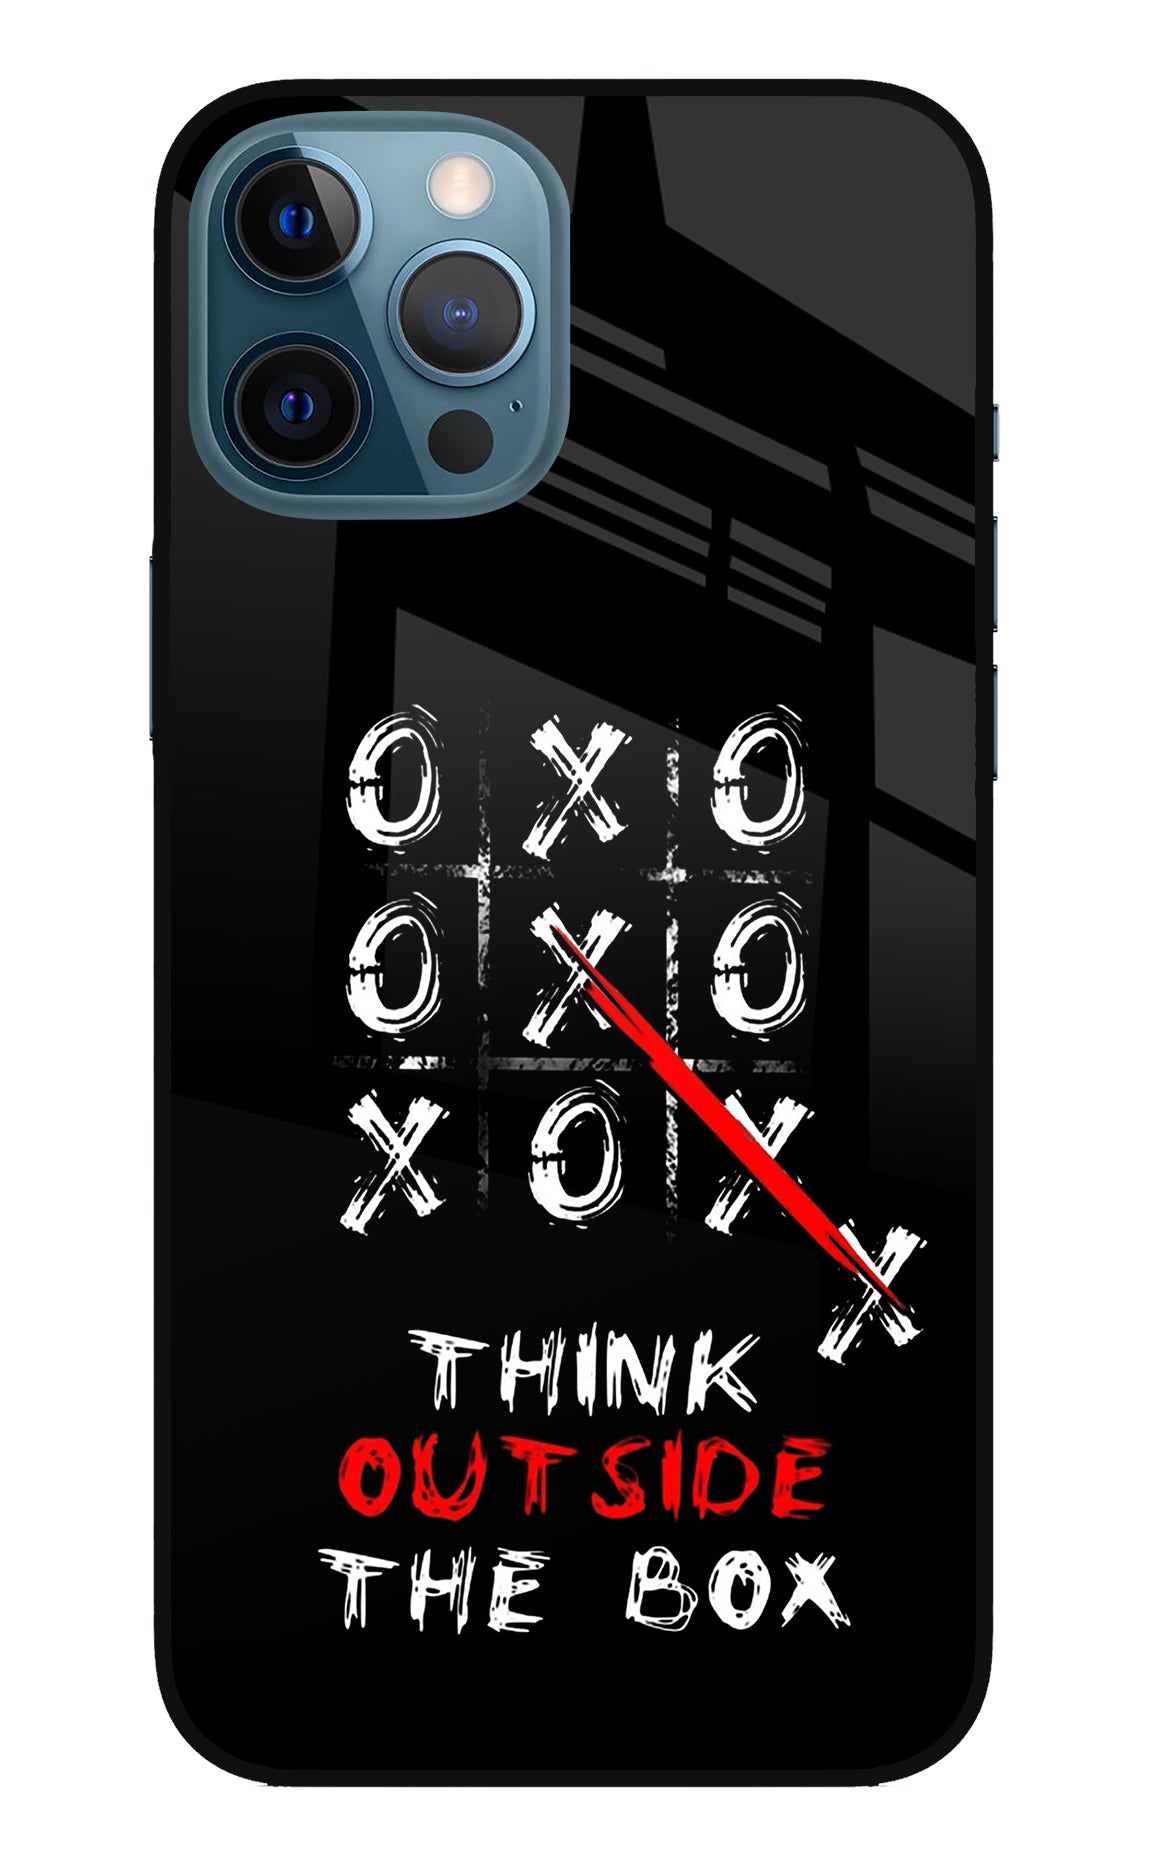 Think out of the BOX iPhone 12 Pro Max Back Cover